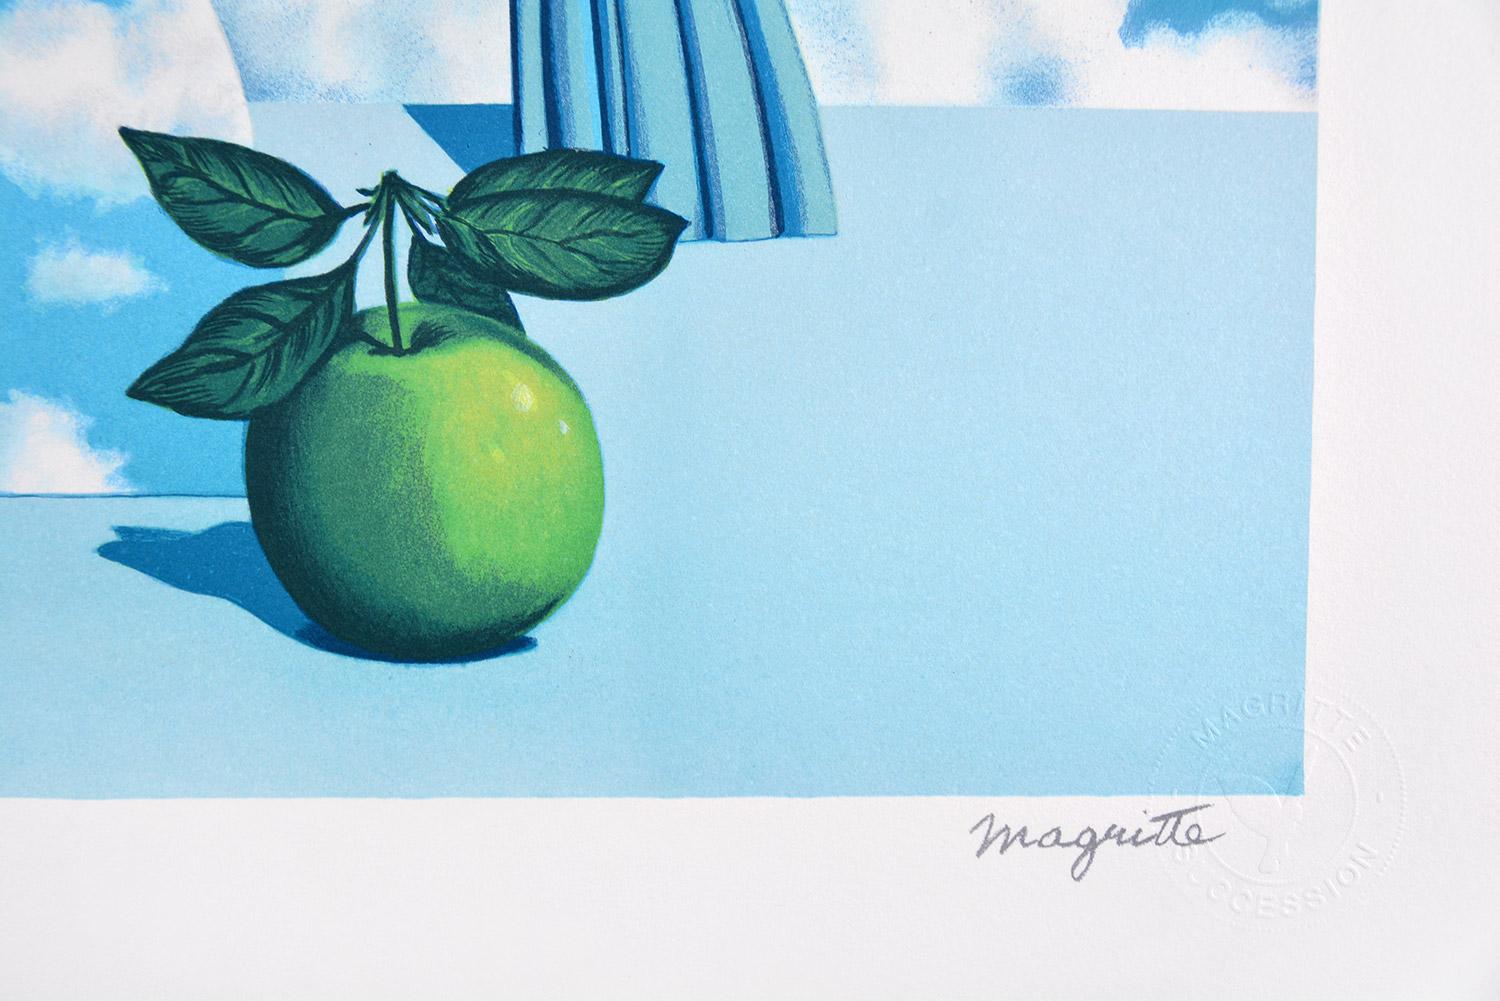 René Magritte - LE BEAU MONDE, 1962 (THE BEAUTIFUL WORLD)
Date of creation: 2010
Medium: Lithograph on BFK Rives Paper
Edition number: 154/275
Size: 60 x 45 cm
Condition: In very good conditions and never framed
Observations: Lithograph on BFK Rives